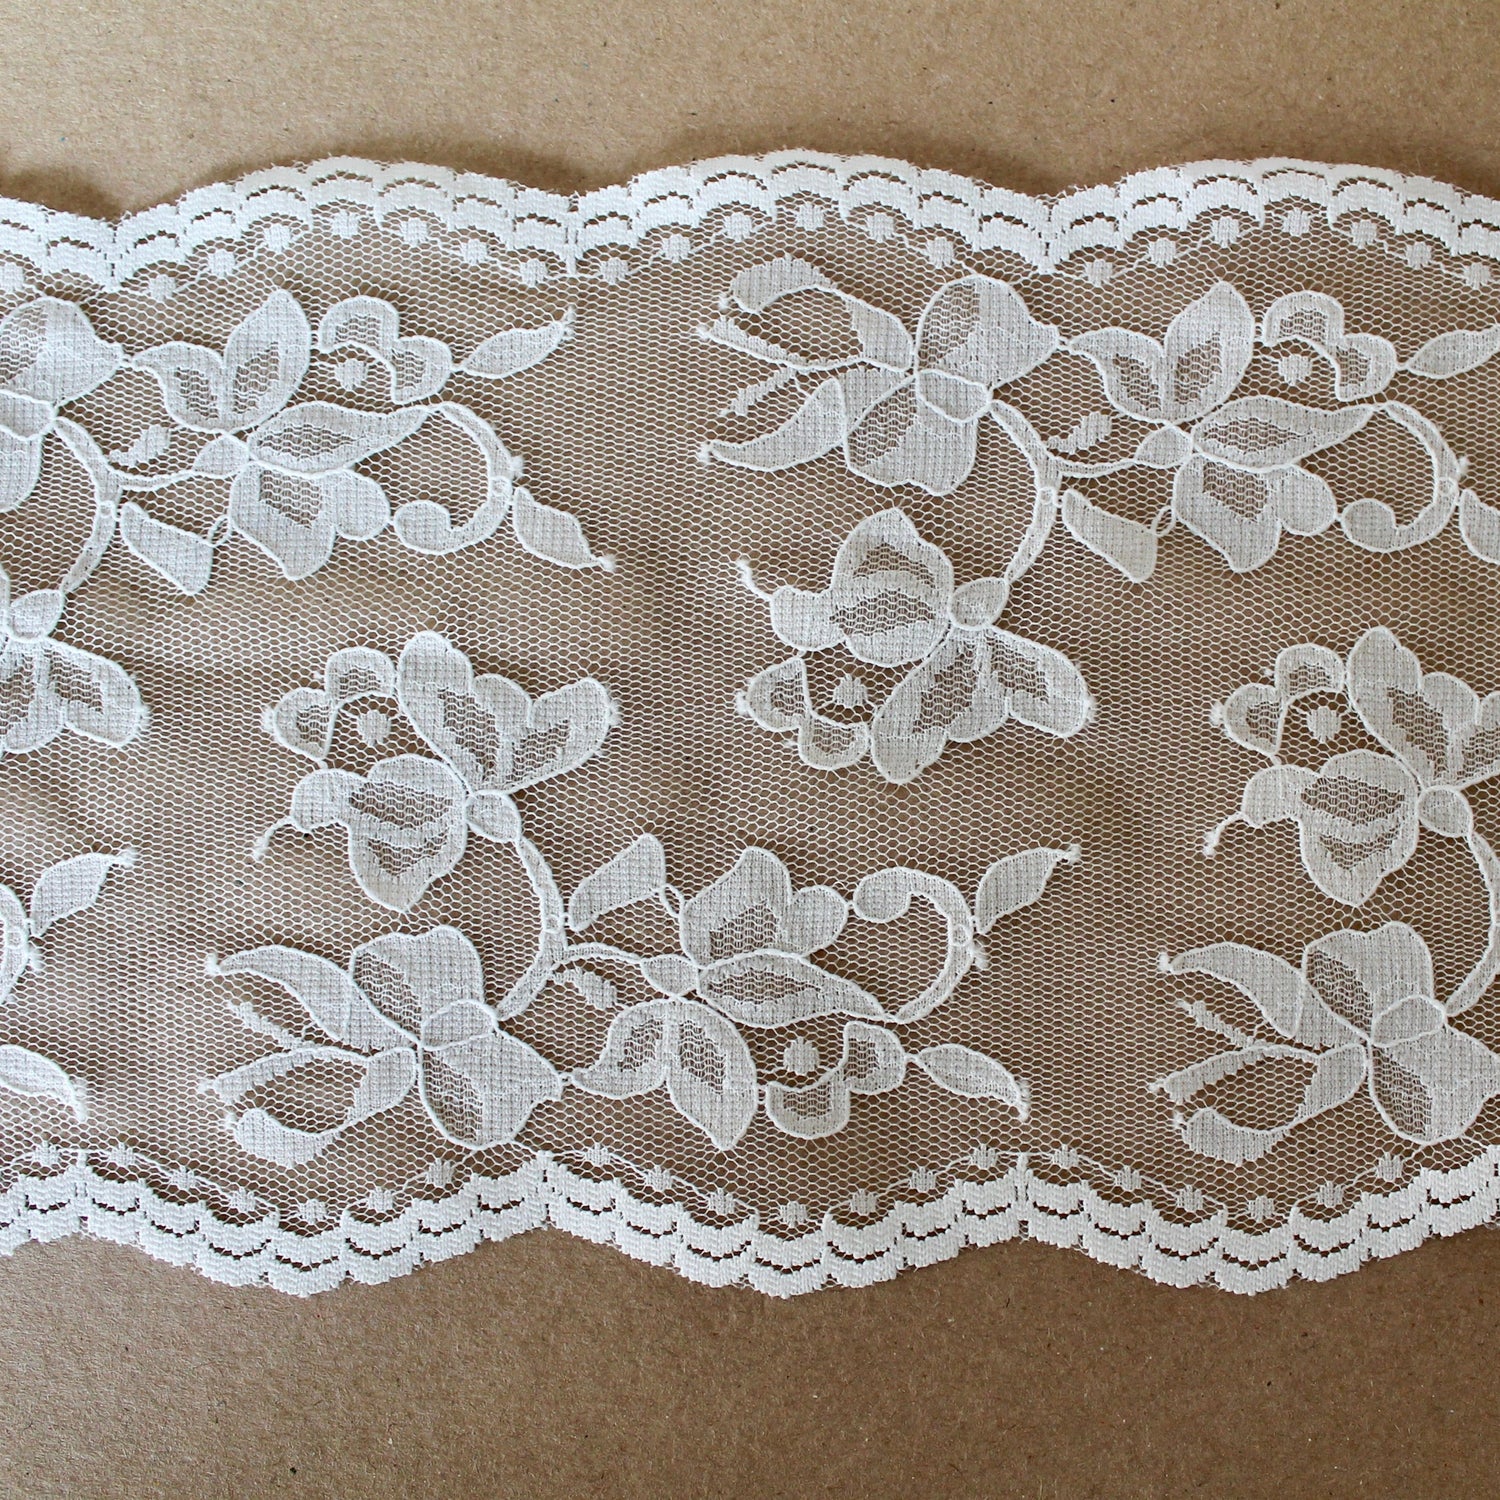 Non-stretch Floral Galloon Lace 14cm | Bra Making Supplies UK | Price